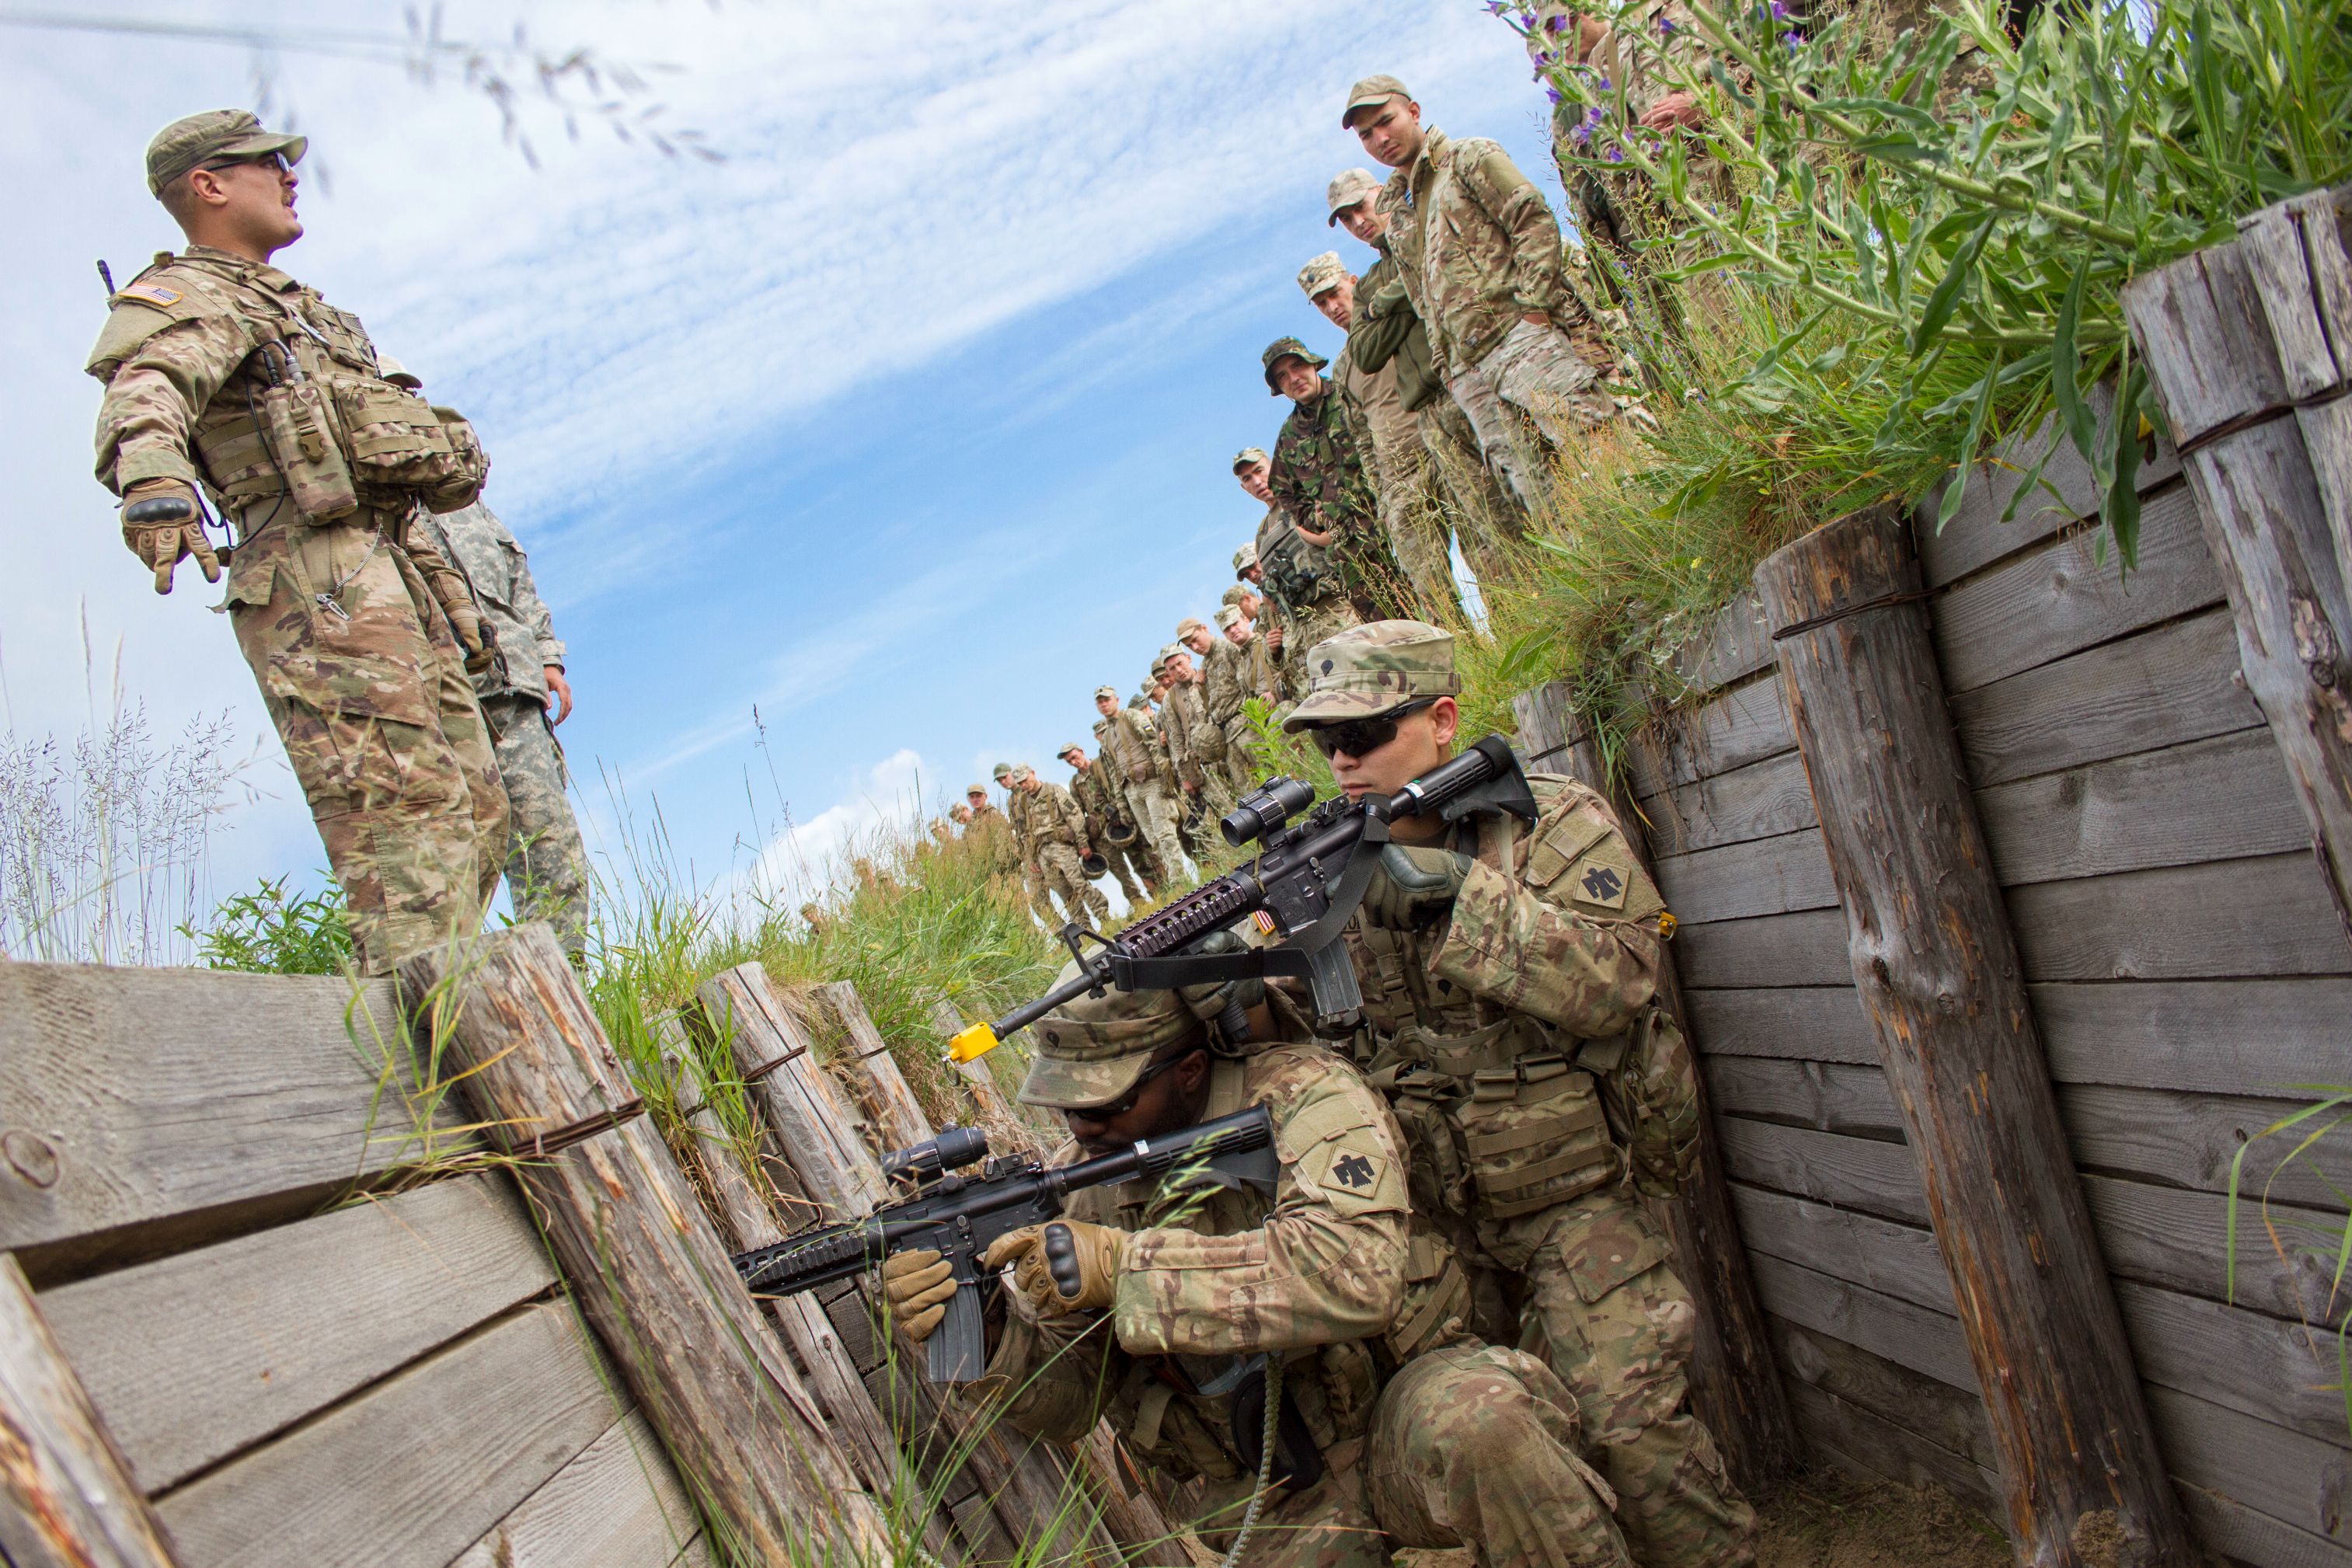 Sgt. Brett Mussyal, a U.S. Army Soldier with the 45th Infantry Brigade Combat Team, explains how to clear a trench to Ukrainian soldiers from the 1st Airmobile Battalion, 79th Air Assault Brigade while U.S. Soldiers demonstrate during trench assault and clearance training at the Yavoriv Combat Training Center on the International Peacekeeping and Security Center, near Yavoriv, Ukraine, on June 13.